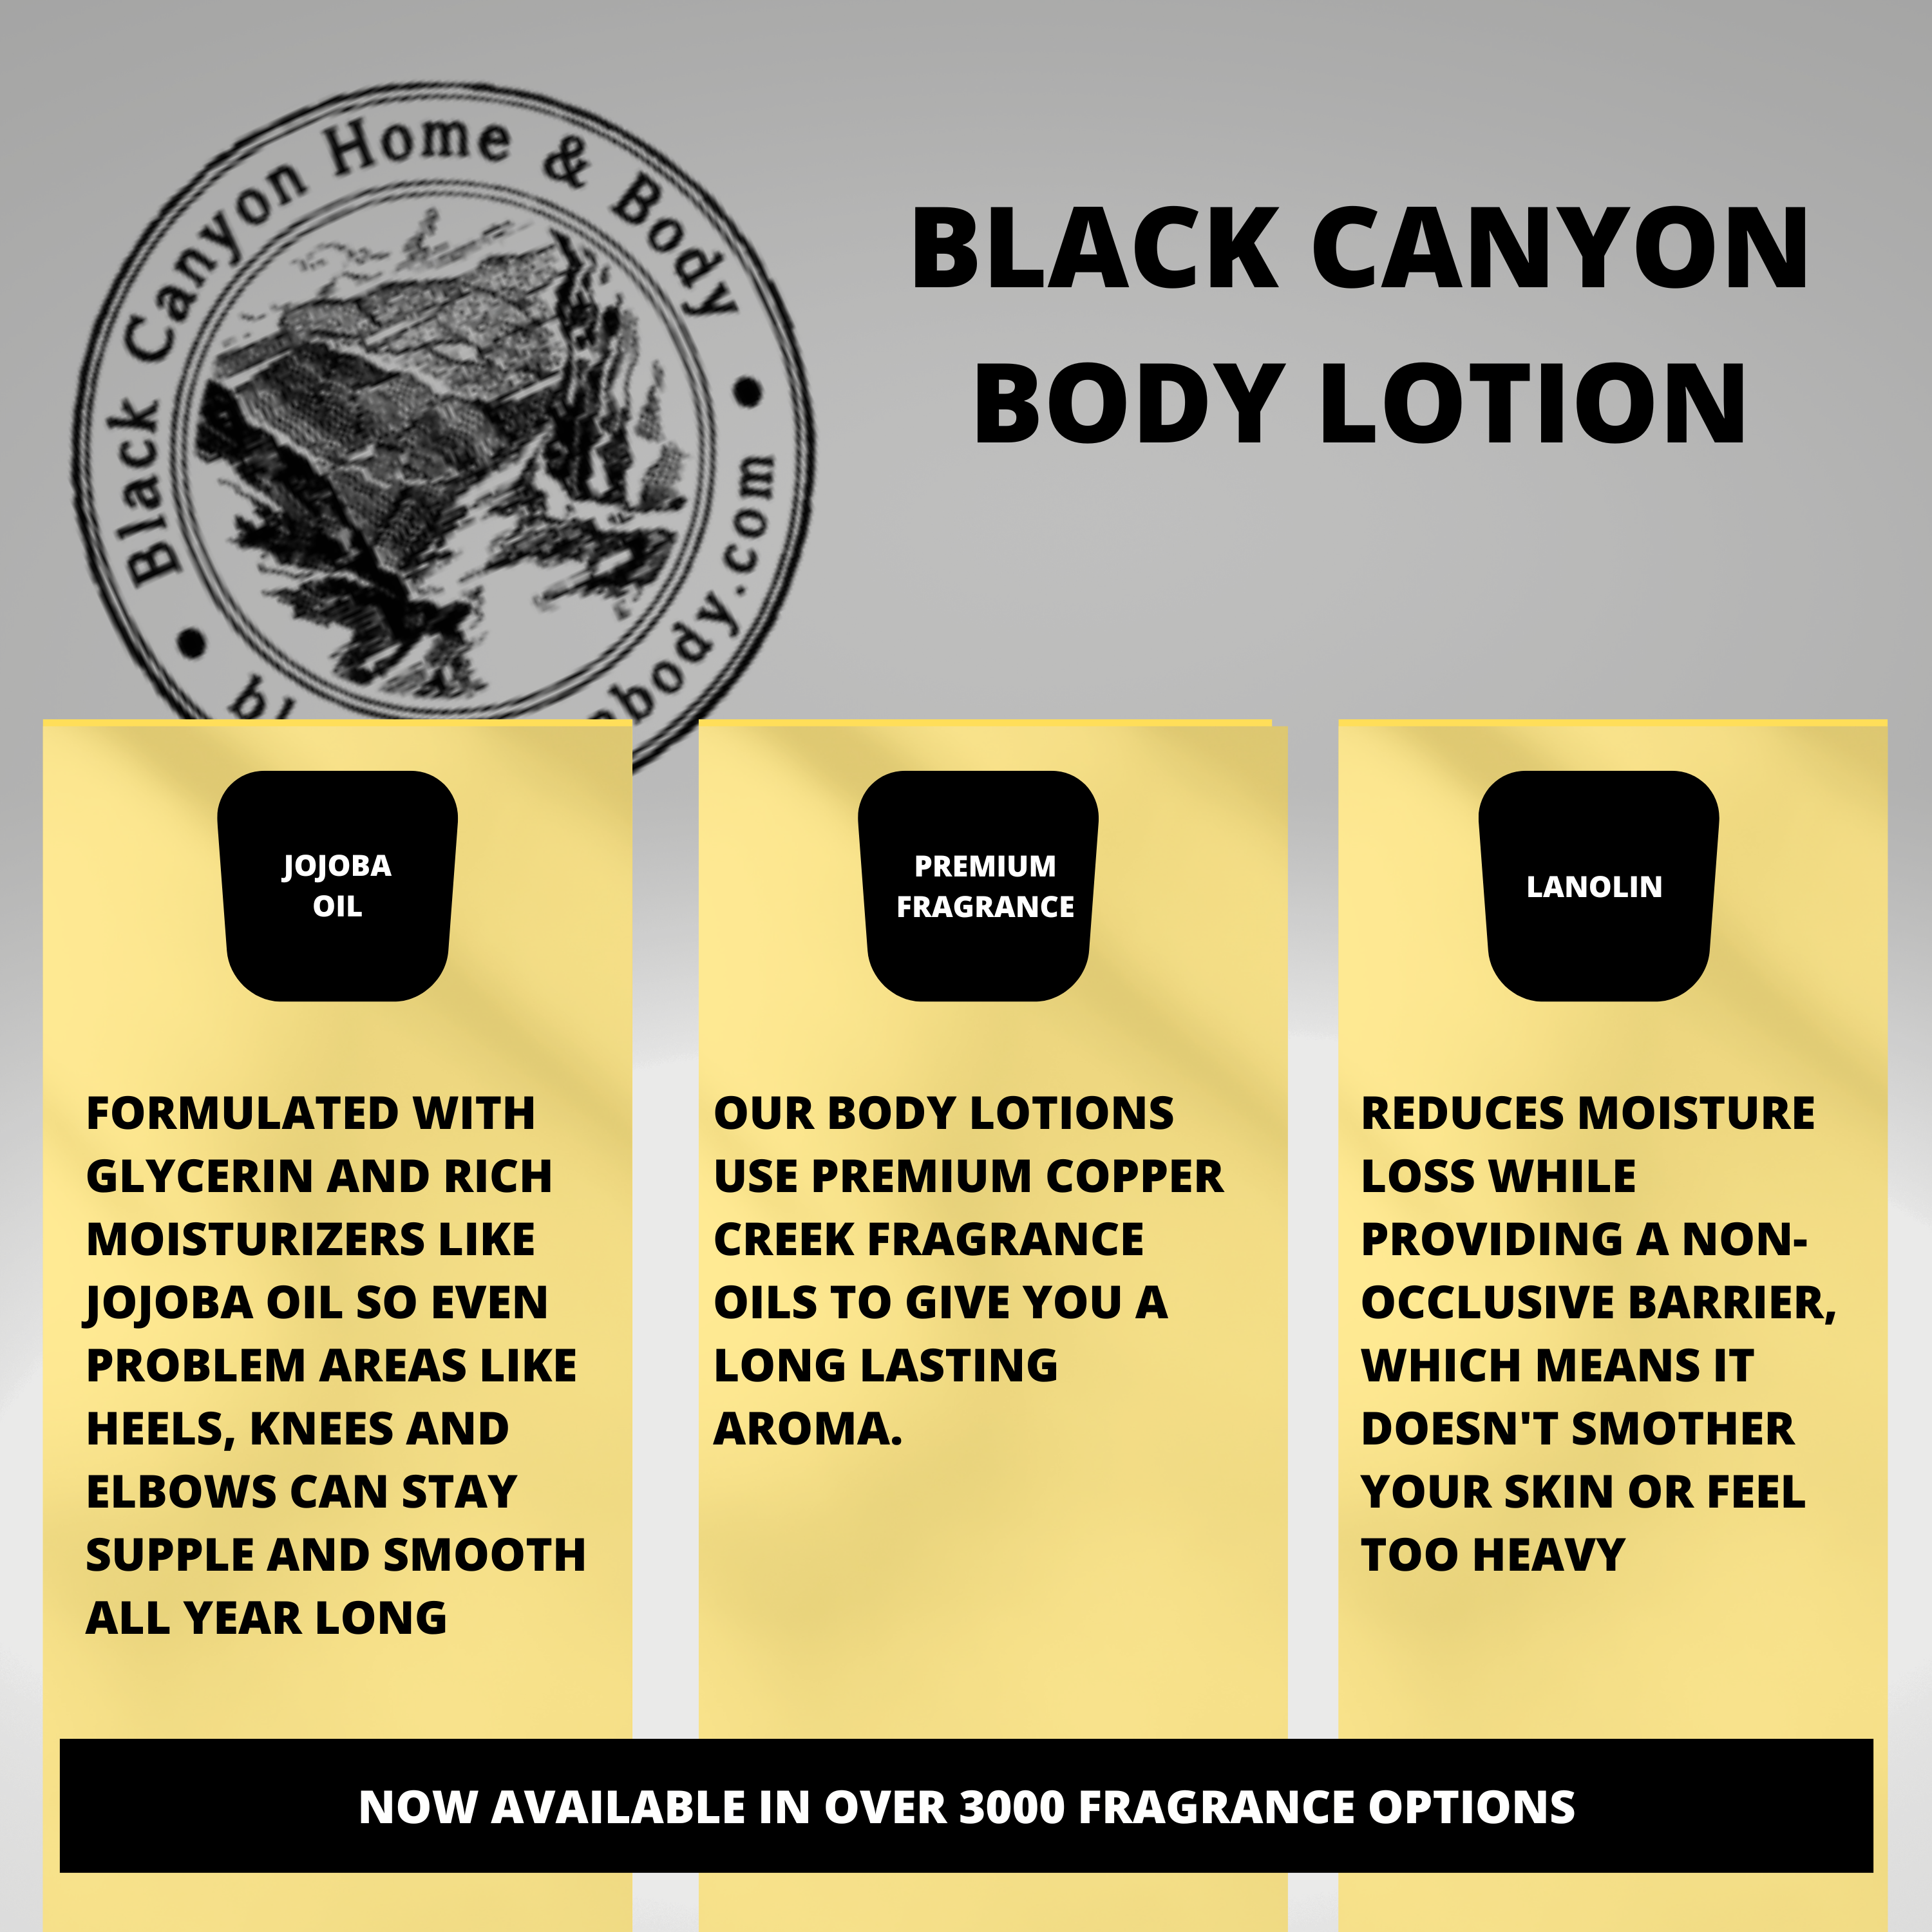 Black Canyon Wild Fig & Wasabi Scented Luxury Body Lotion with Lanolin and Jojoba Oil